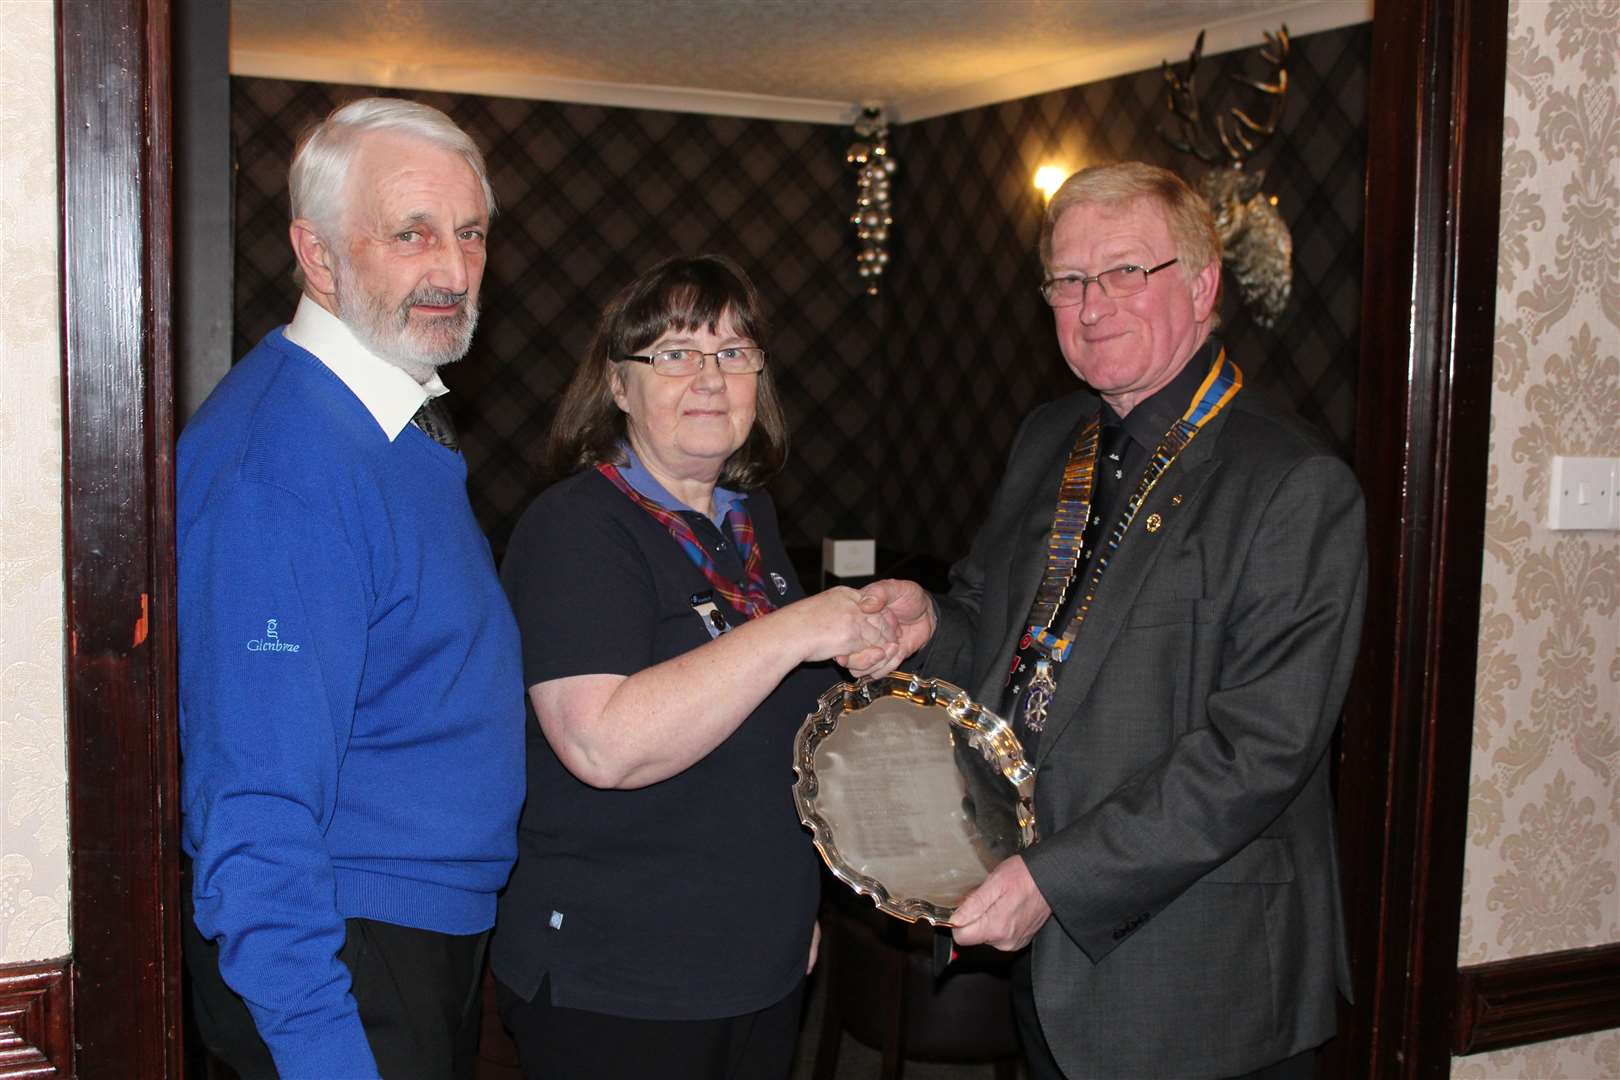 Turriff and District Rotary Club's community convenor Robert Pirie and president Iain Matthews present the Citizen Of The Year award to Mabel Webster. Picture: Kirsty Brown